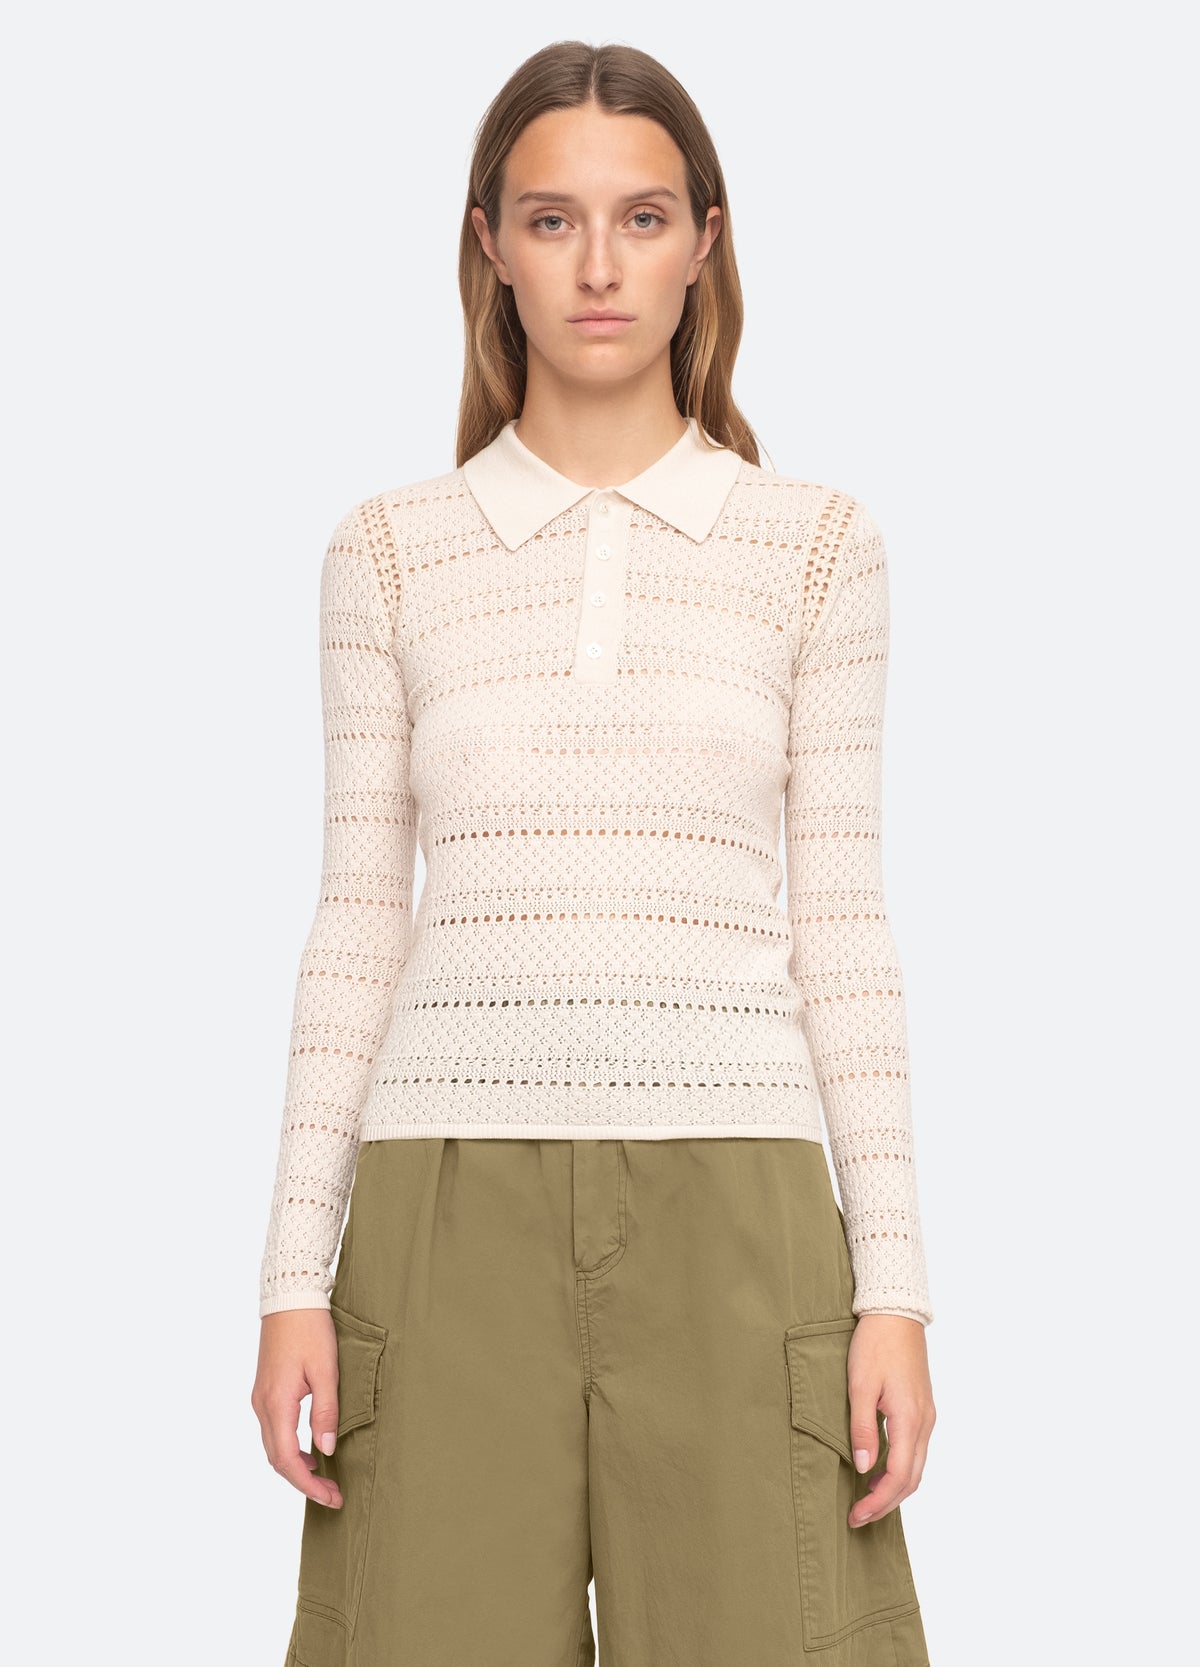 cream-syble sweater-front view 2